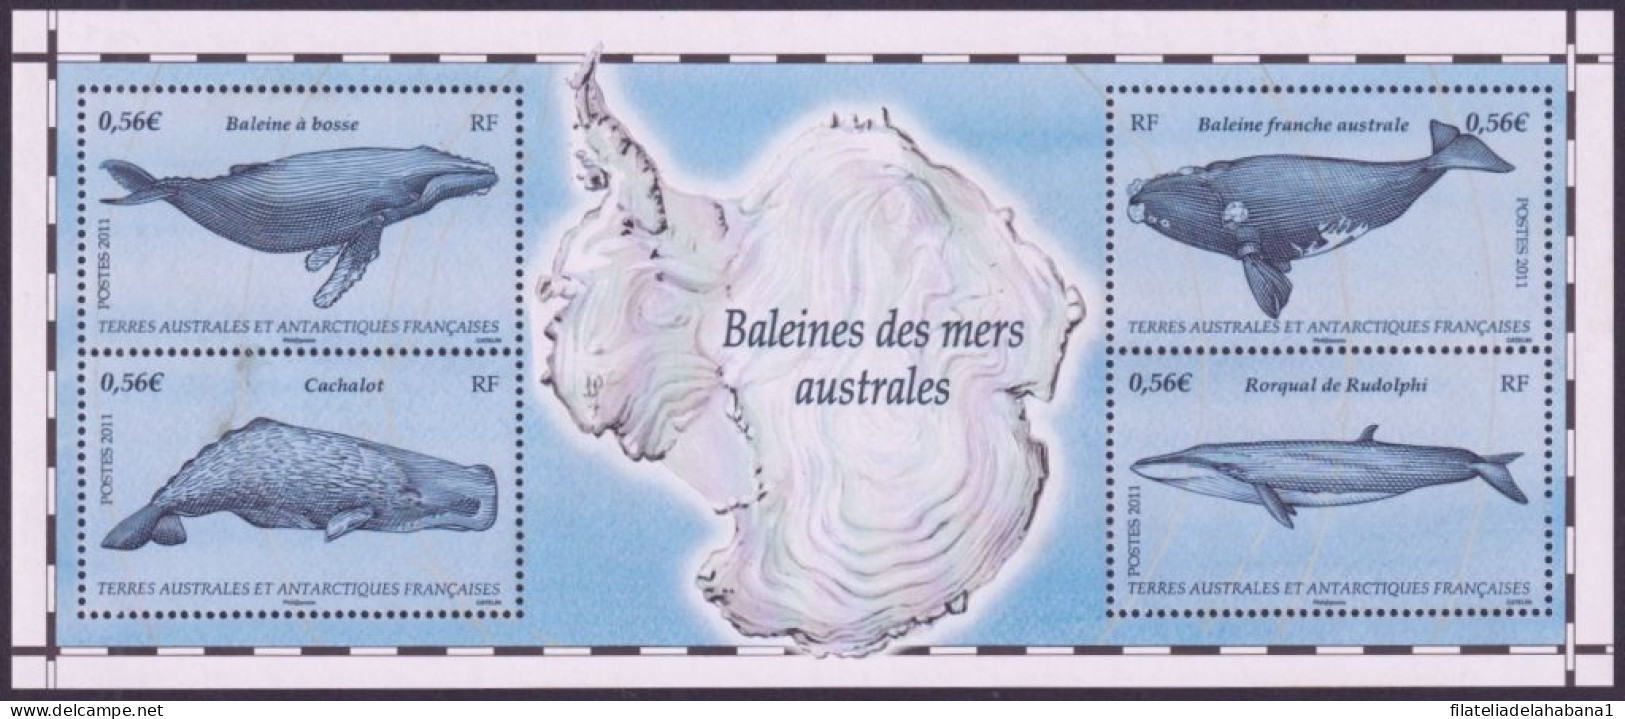 F-EX49834 TAAF FRANCE ANTARCTIC MNH 2011 MARINE WILDLIFE FISH WHALE OF SOUTHERN. - Baleines